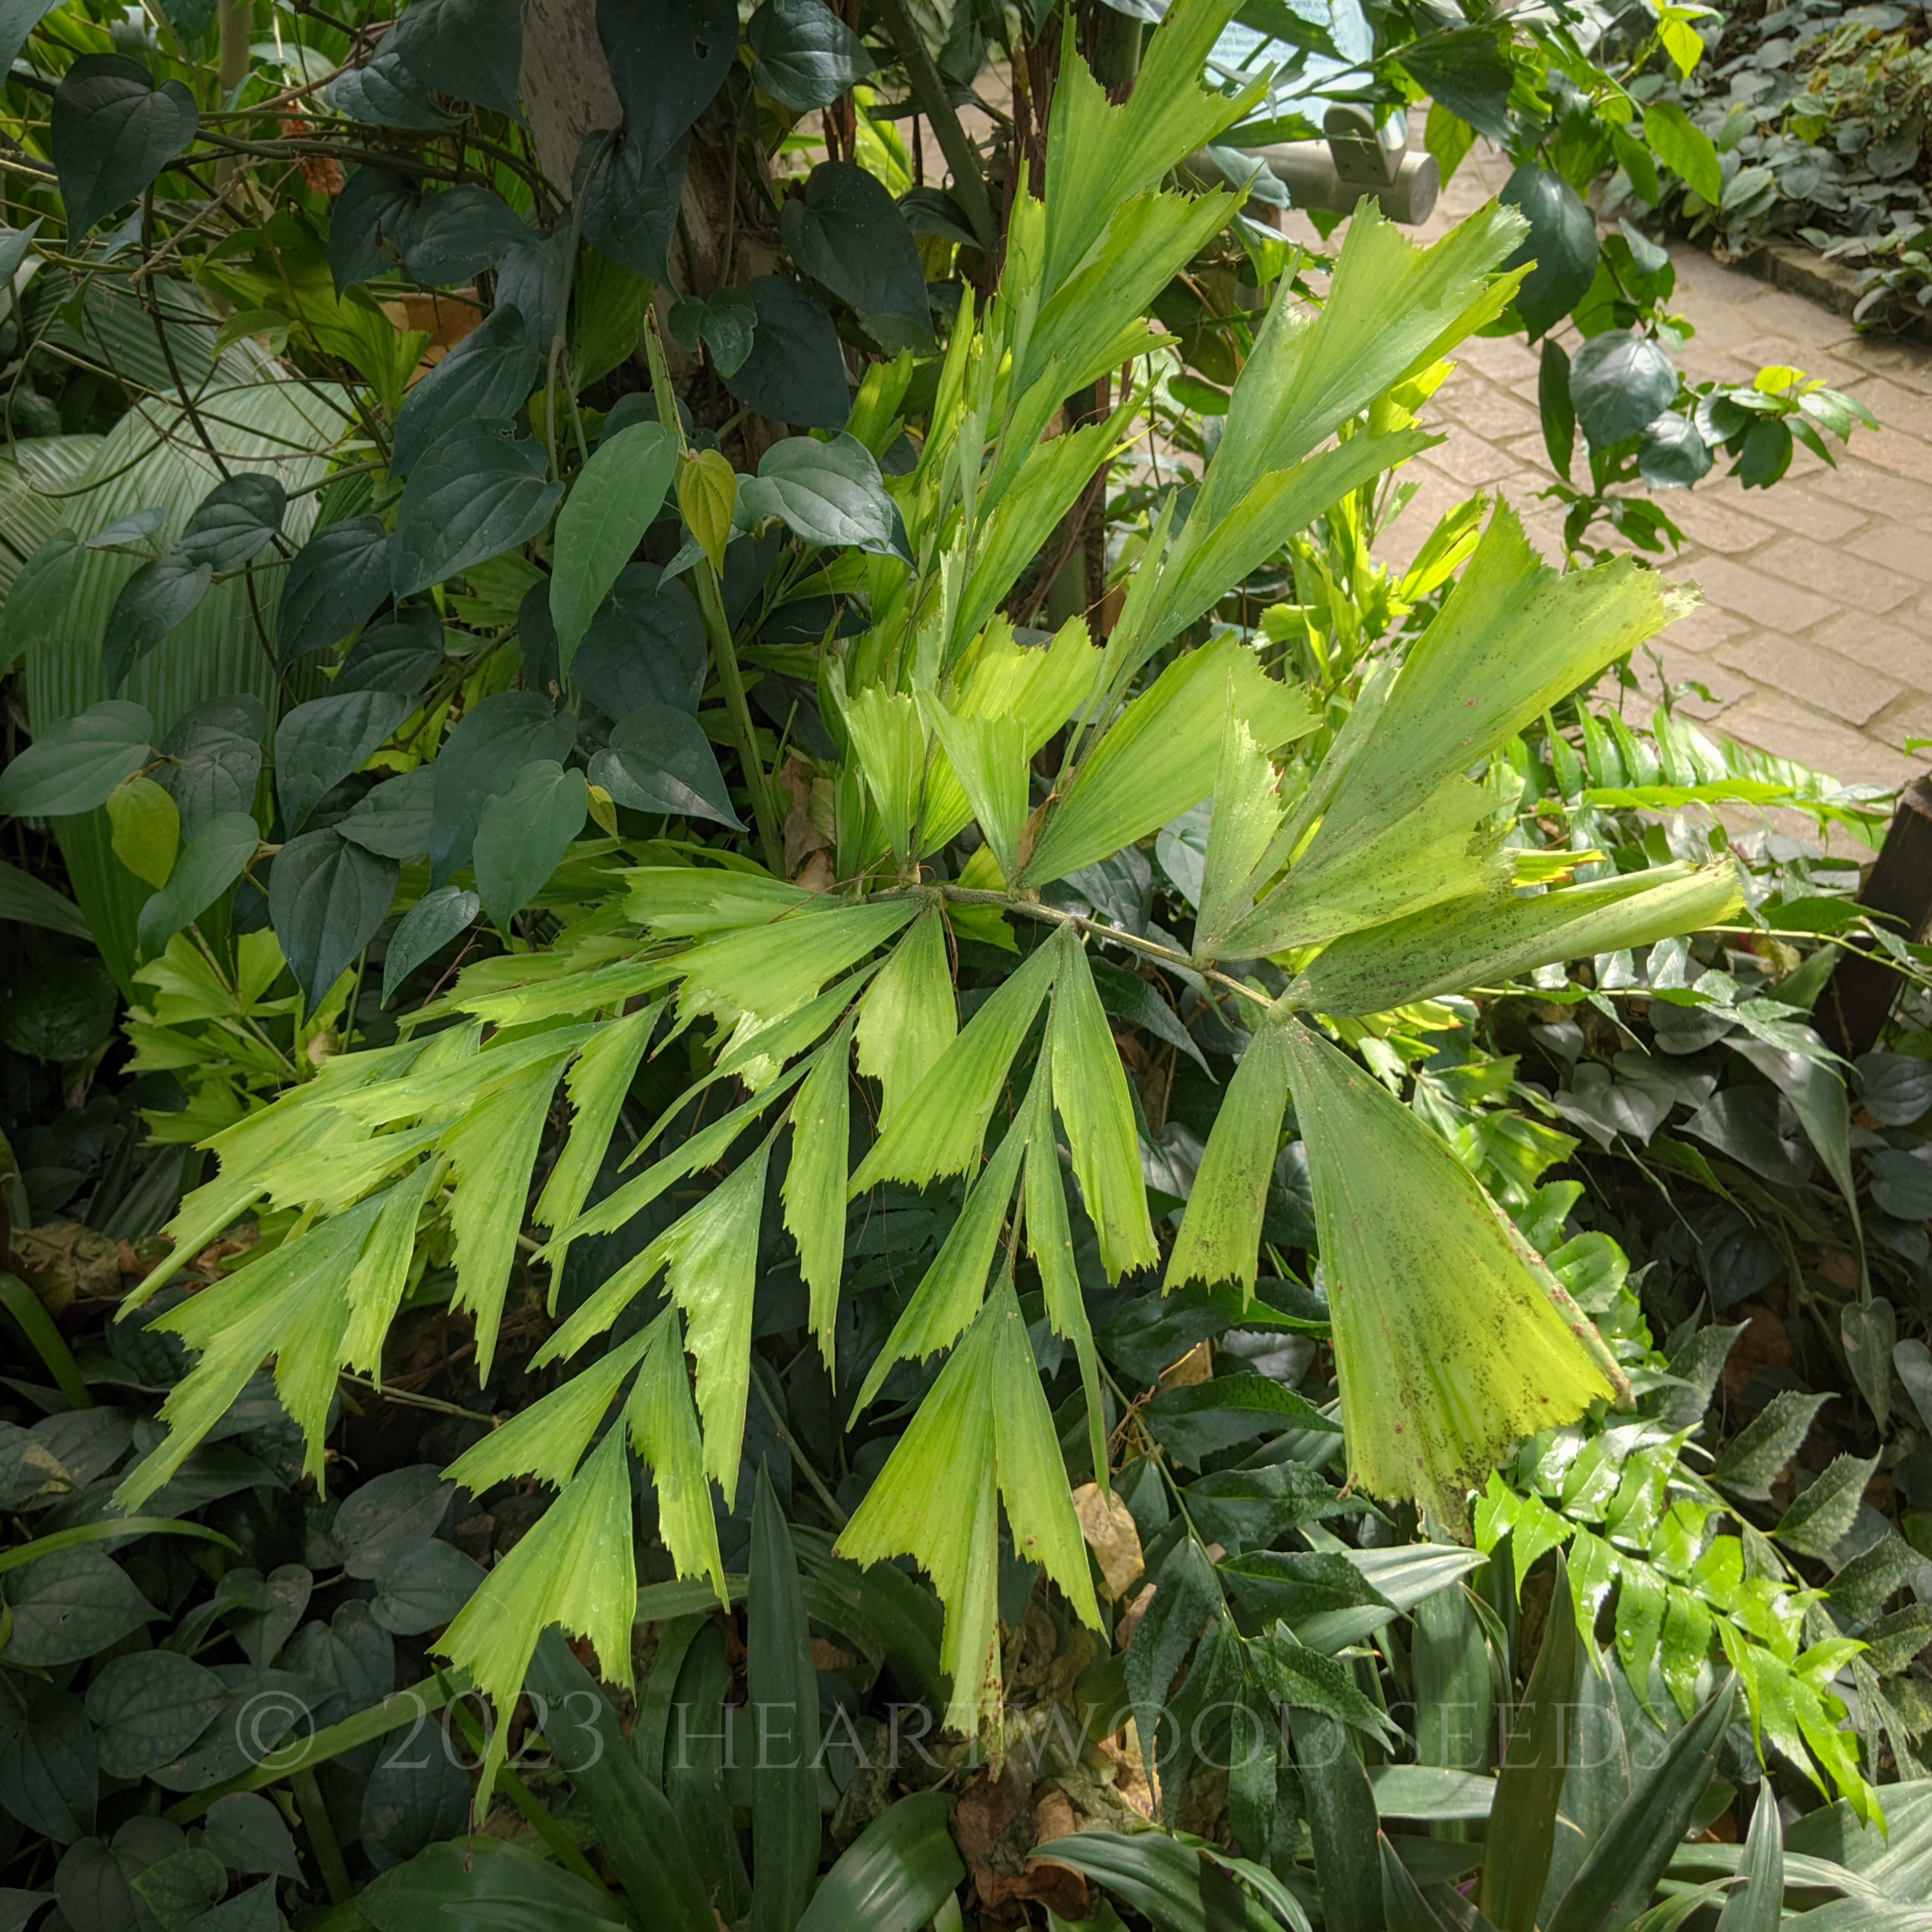 Caryota mitis (Clustered Fishtail Palm) 3 - 25 Fresh Seeds £3.49 - £22.99 –  Heartwood Seeds